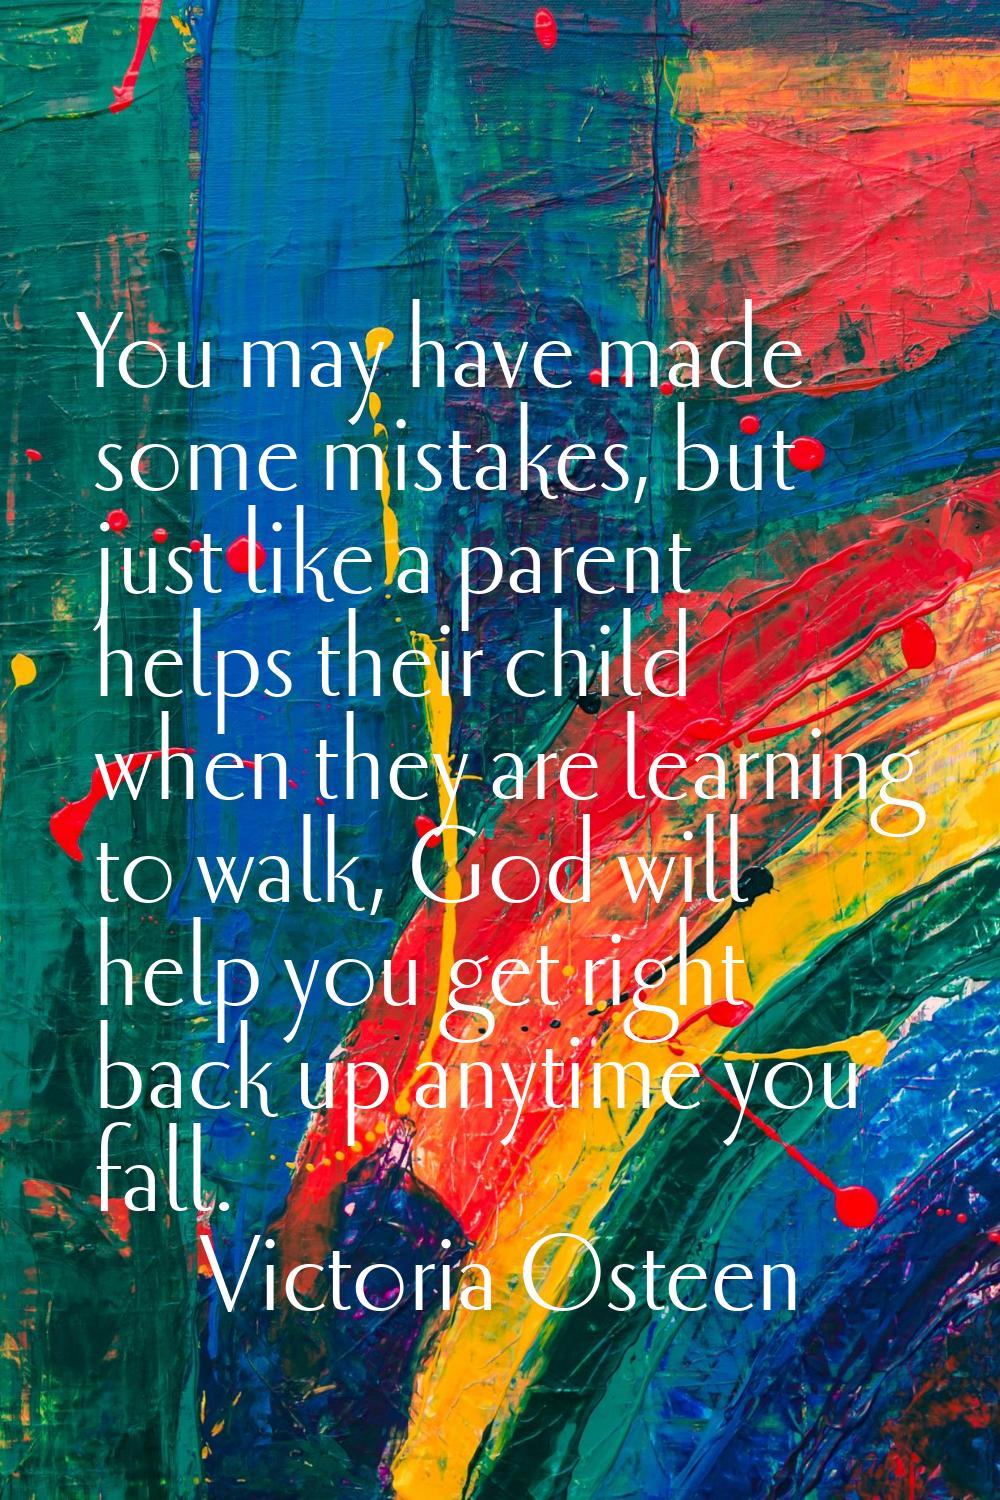 You may have made some mistakes, but just like a parent helps their child when they are learning to